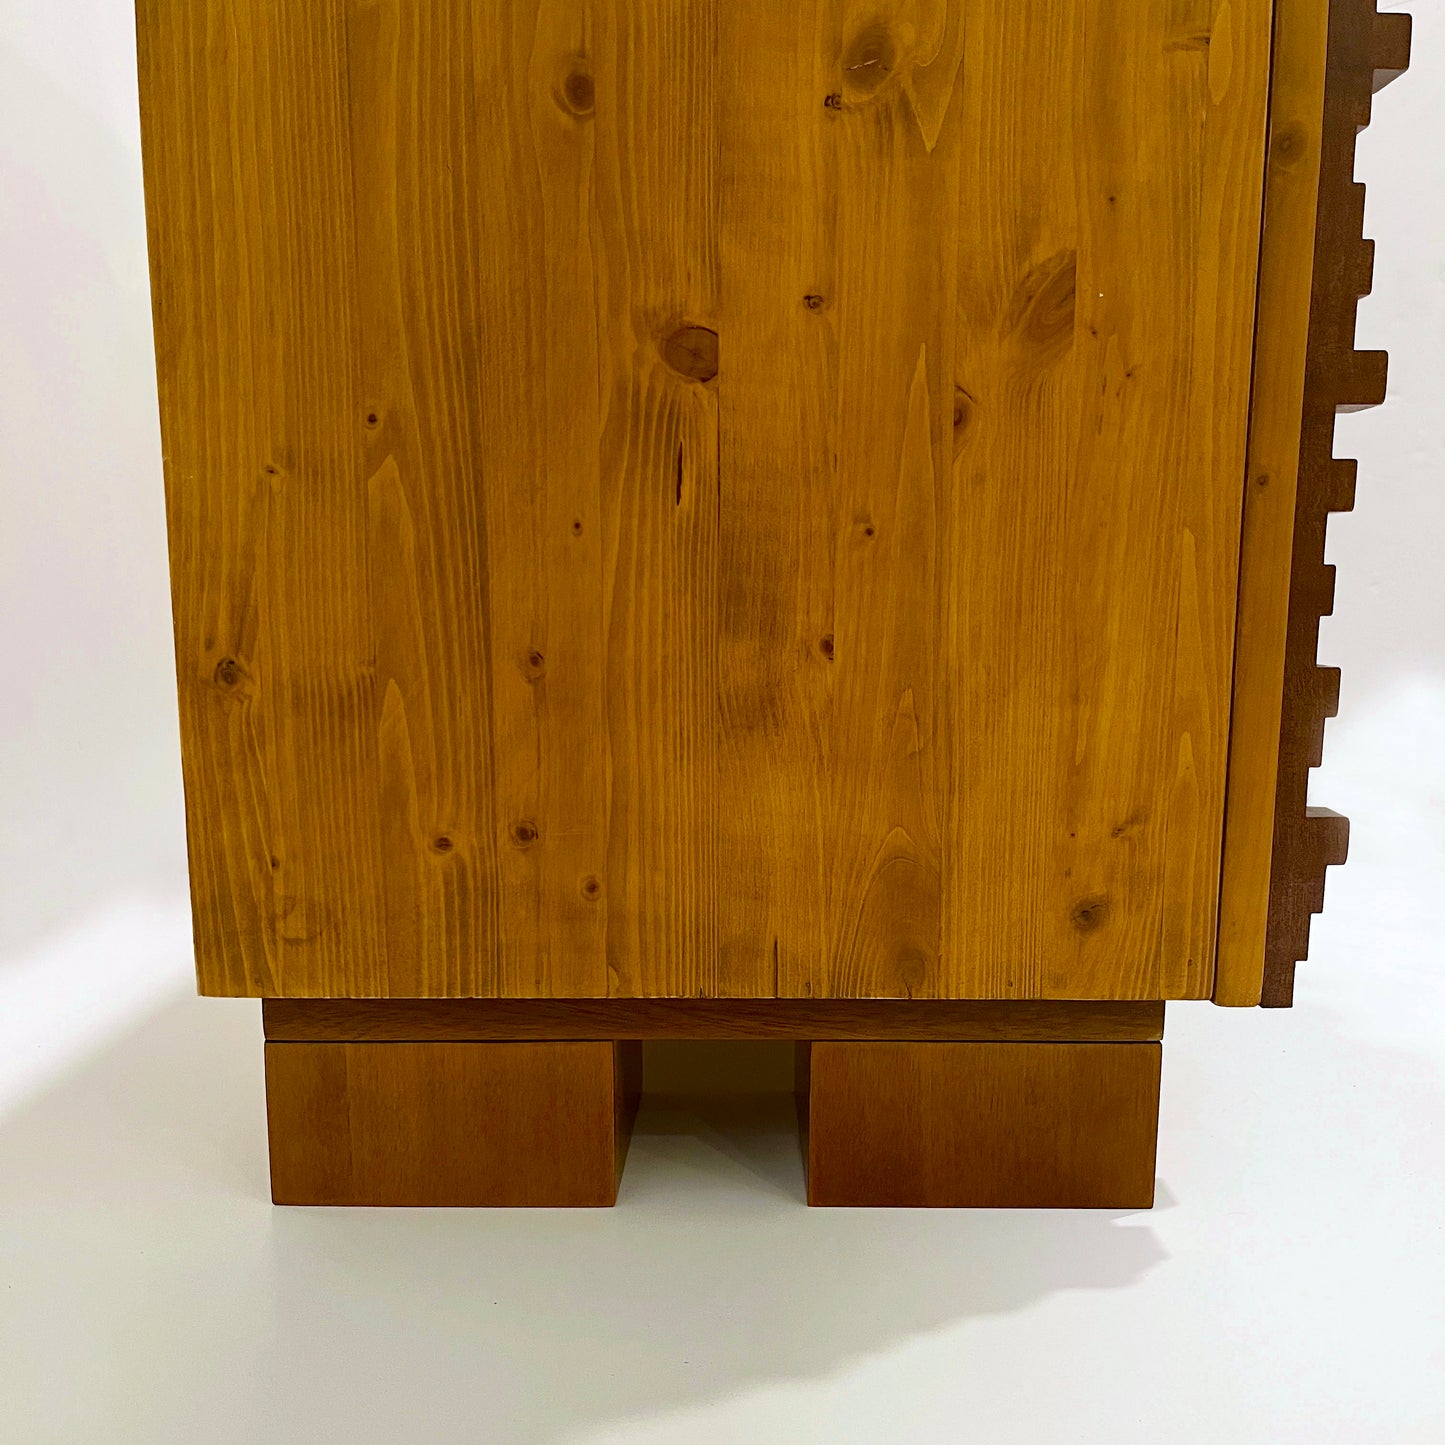 Contemporary Italian 2-Door Modern Cabinet/Sideboard in Solid Carved Beech Wood